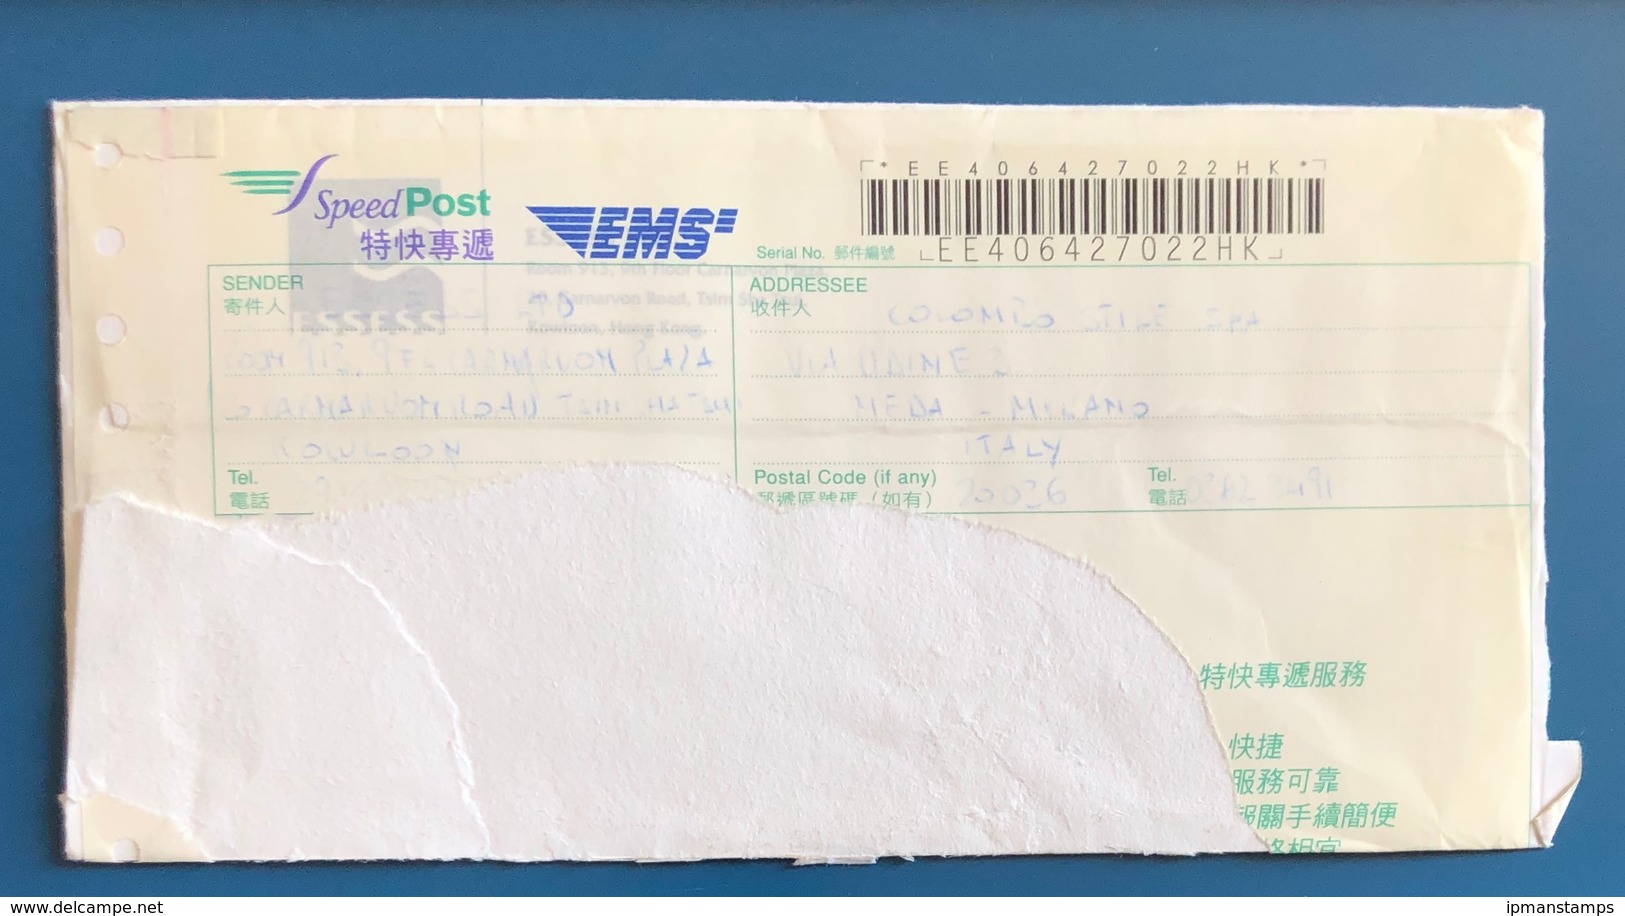 STORIA POSTALE, BUSTA DI POSTA VELOCE - POSTAL HISTORY, SPEED POST LETTER, ANNO/YEAR 1999 - Covers & Documents